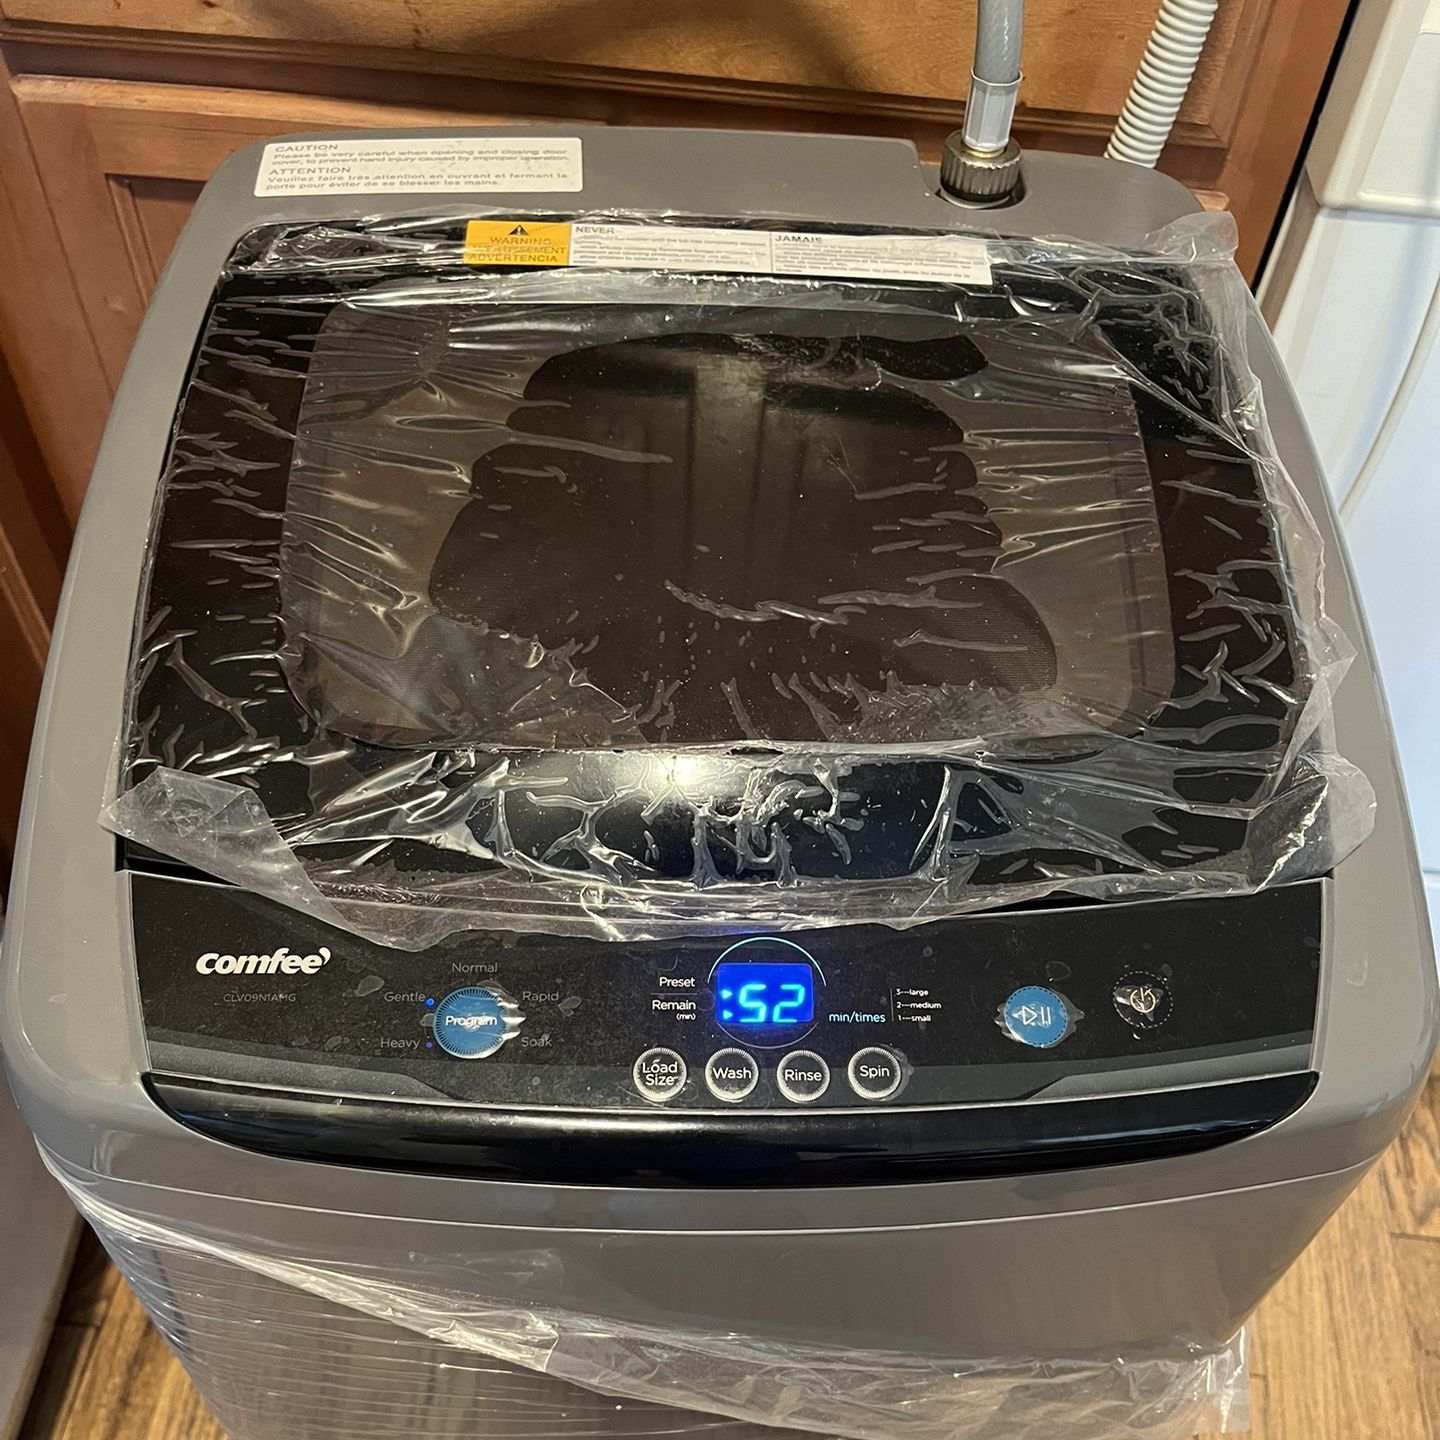 June 18] Moving Sale, Comfee Portable Washing Machine for Sale in